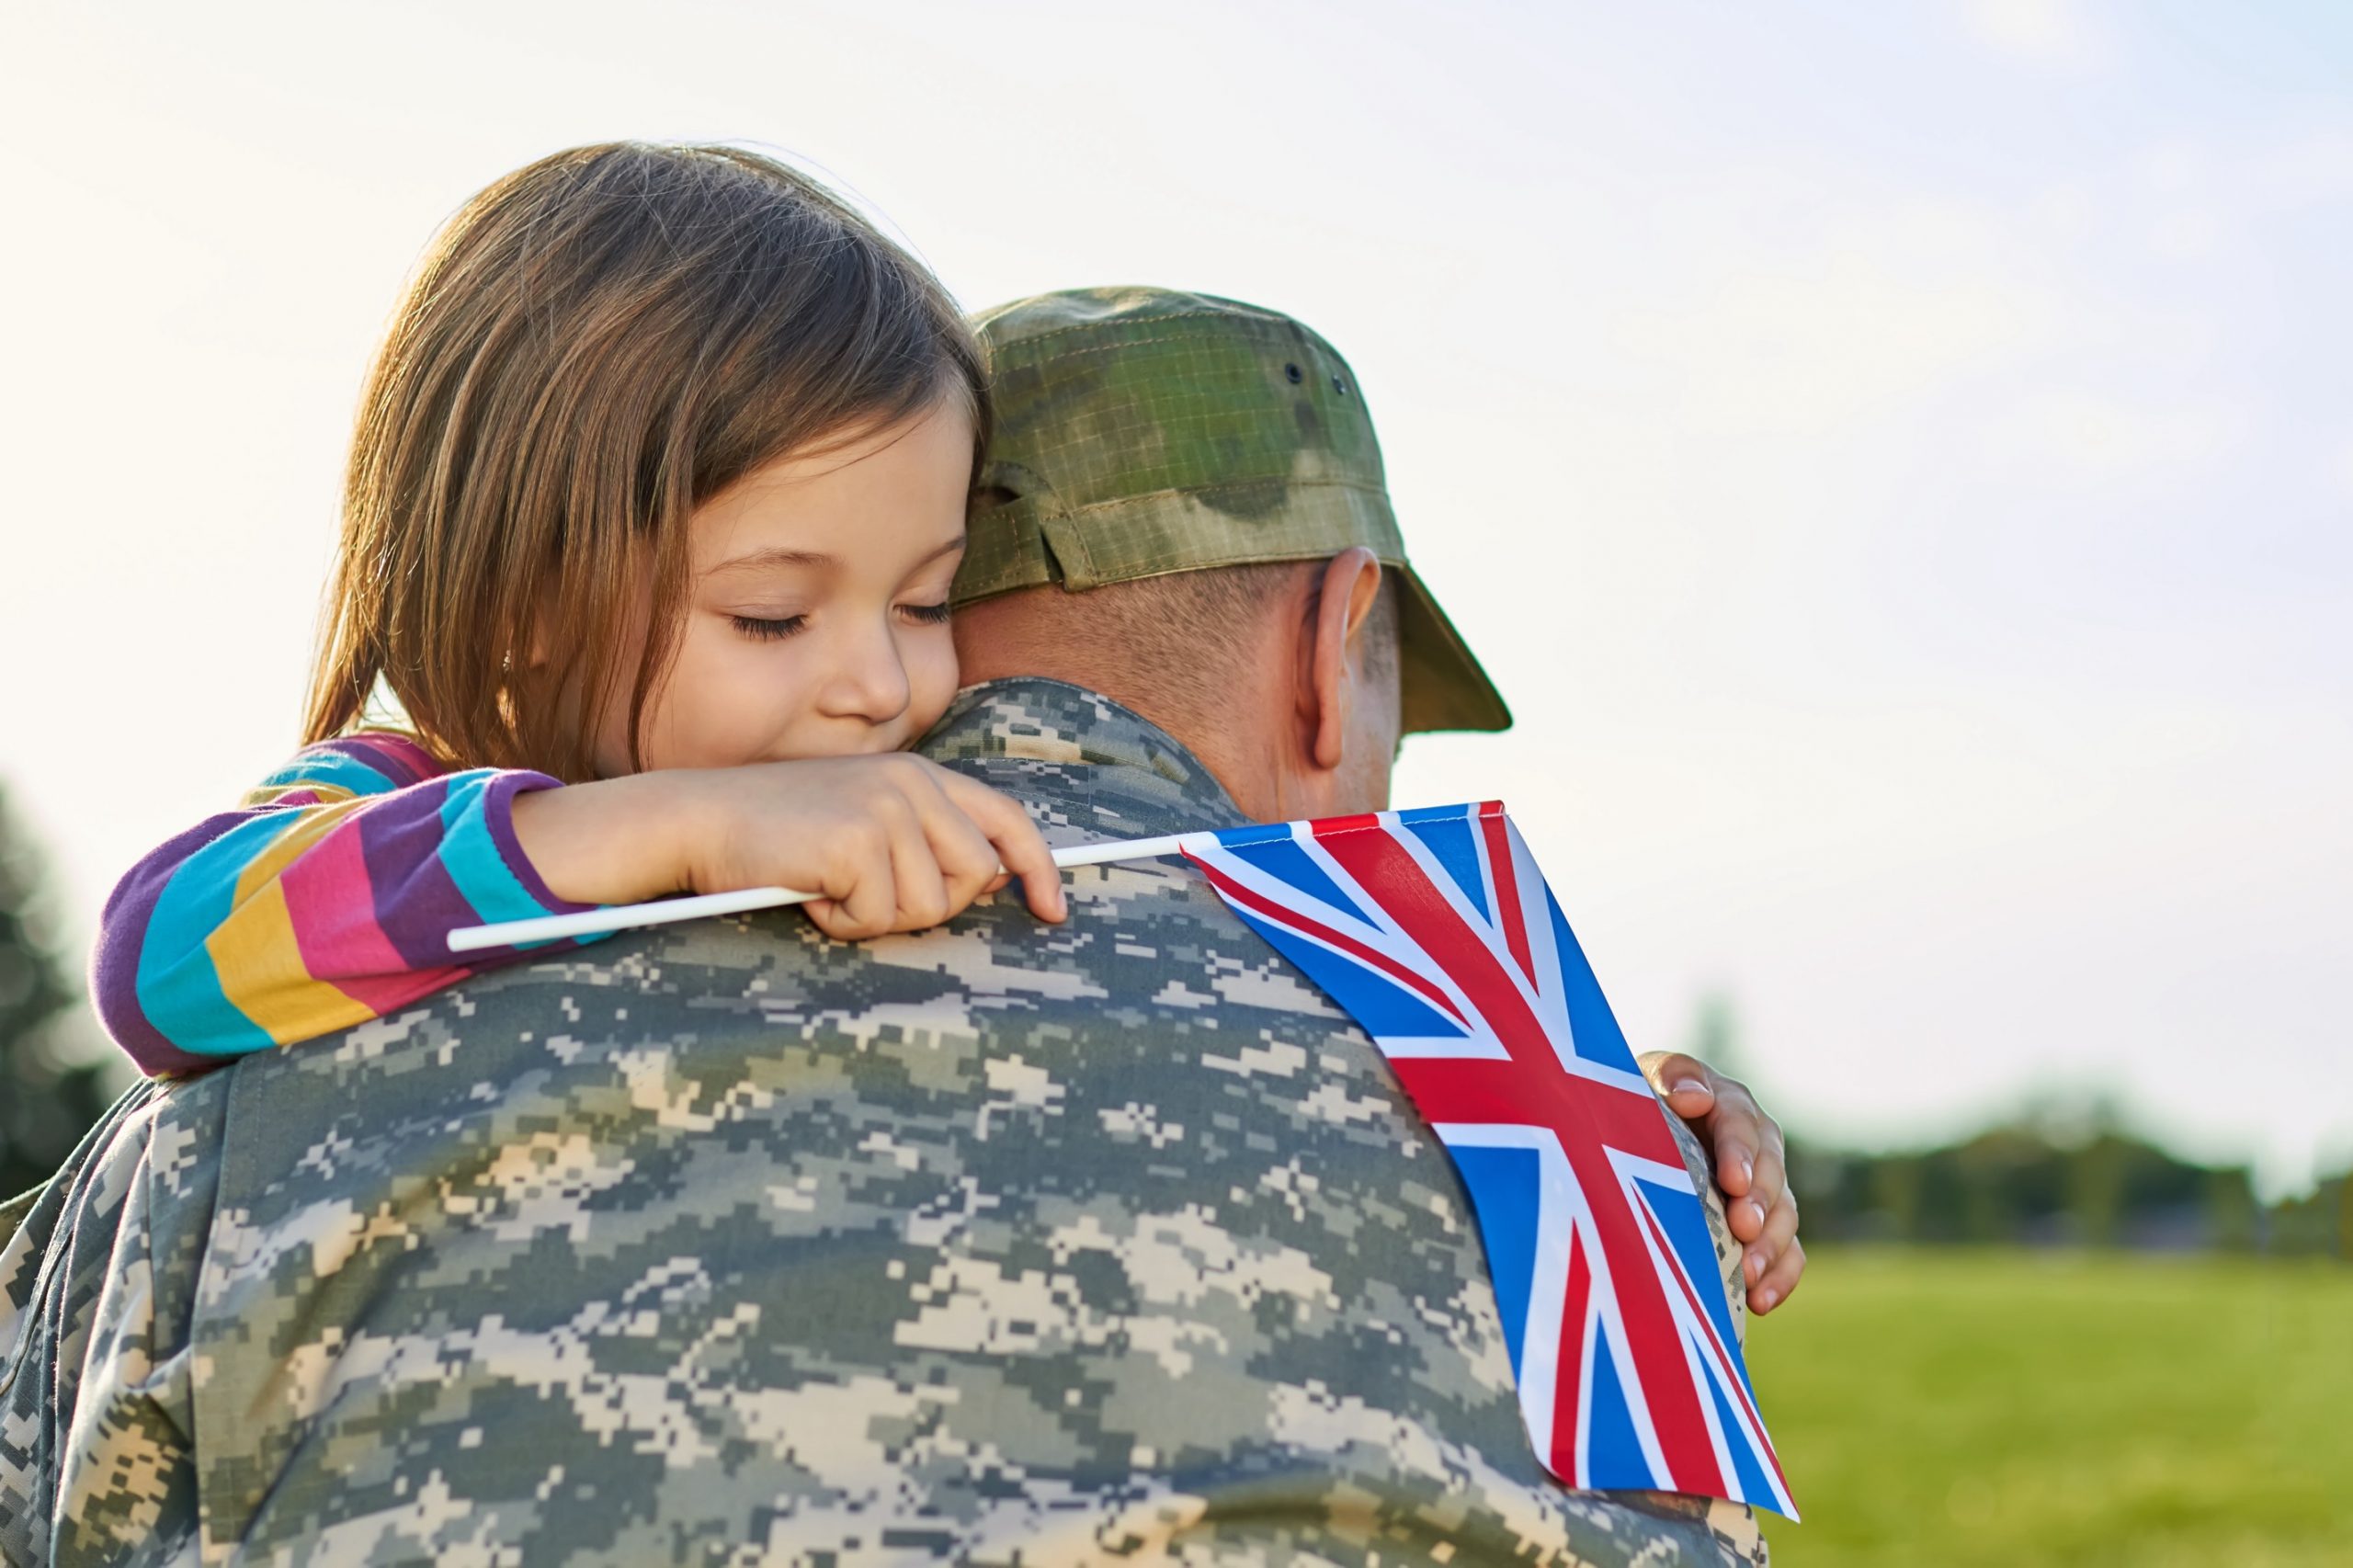 Happy reunion of british soldier and his little daughter. Girl with british flag is embracing her father. Photo by DenisProduction.com on Shutterstock